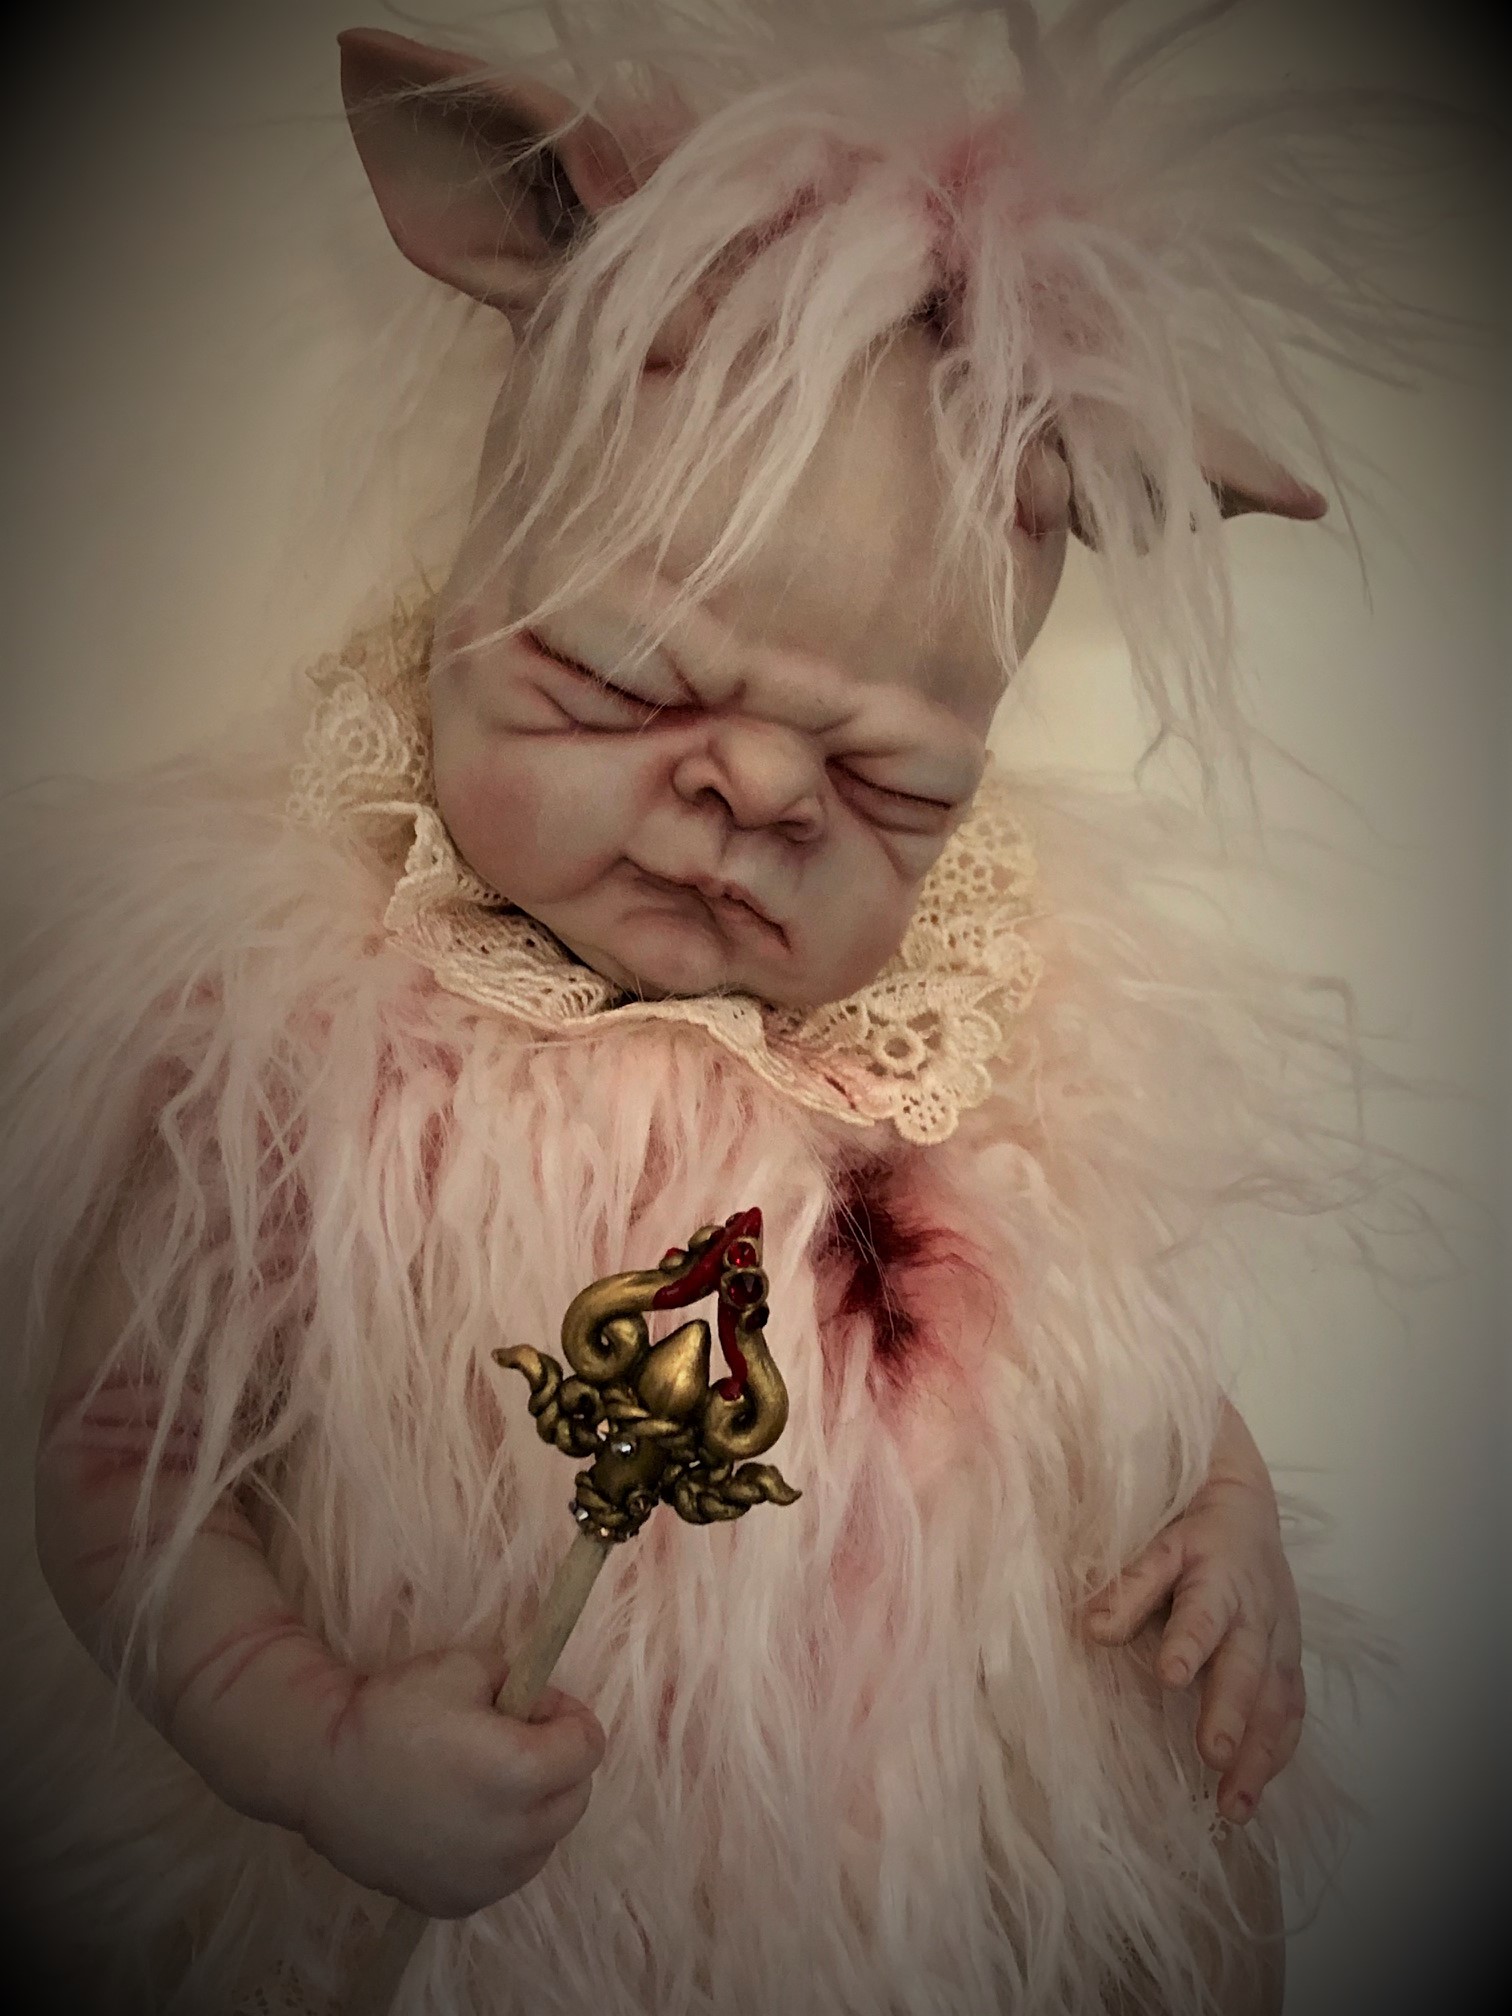 mixed media artdoll hybrid lamb babydoll with hand-painted vinyl head light pink faux fur, baby clutches the arrow that mortally wounded her bloody chest